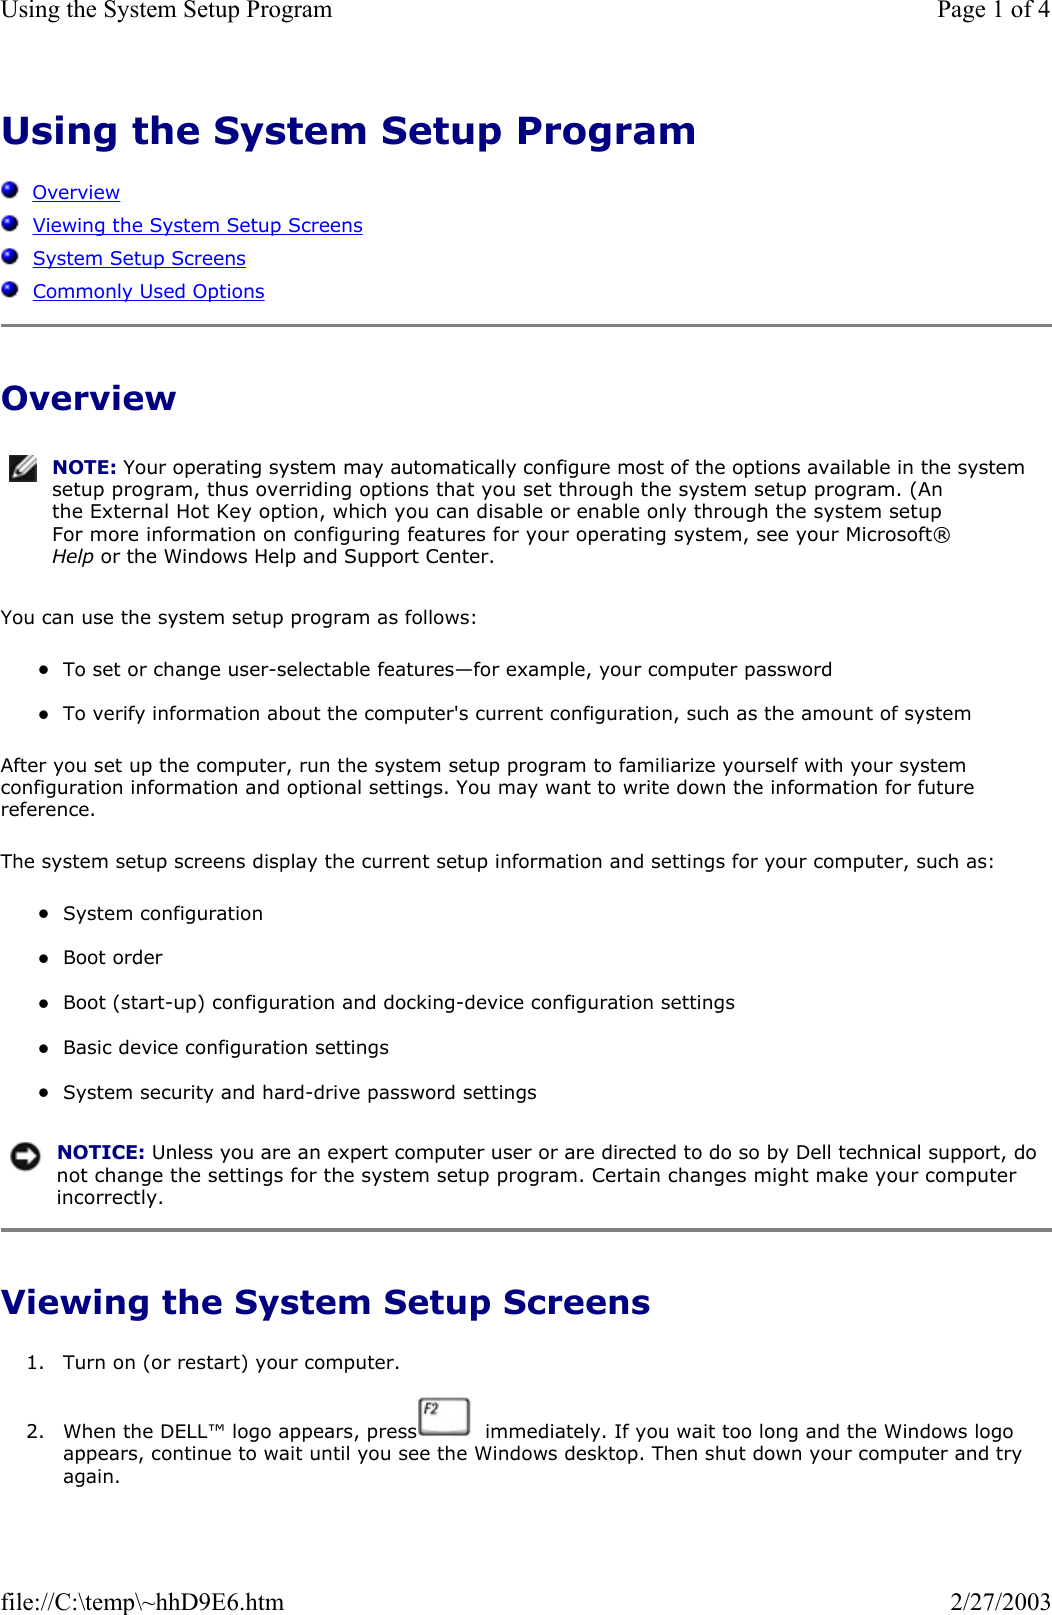 Using the System Setup Program      Overview   Viewing the System Setup Screens   System Setup Screens   Commonly Used Options Overview You can use the system setup program as follows: zTo set or change user-selectable features—for example, your computer password  zTo verify information about the computer&apos;s current configuration, such as the amount of system  After you set up the computer, run the system setup program to familiarize yourself with your system configuration information and optional settings. You may want to write down the information for future reference. The system setup screens display the current setup information and settings for your computer, such as: zSystem configuration  zBoot order  zBoot (start-up) configuration and docking-device configuration settings  zBasic device configuration settings  zSystem security and hard-drive password settings  Viewing the System Setup Screens 1. Turn on (or restart) your computer.  2. When the DELL™ logo appears, press   immediately. If you wait too long and the Windows logo appears, continue to wait until you see the Windows desktop. Then shut down your computer and try again. NOTE: Your operating system may automatically configure most of the options available in the system setup program, thus overriding options that you set through the system setup program. (An the External Hot Key option, which you can disable or enable only through the system setup For more information on configuring features for your operating system, see your Microsoft® Help or the Windows Help and Support Center.NOTICE: Unless you are an expert computer user or are directed to do so by Dell technical support, do not change the settings for the system setup program. Certain changes might make your computer incorrectly. Page 1 of 4Using the System Setup Program2/27/2003file://C:\temp\~hhD9E6.htm